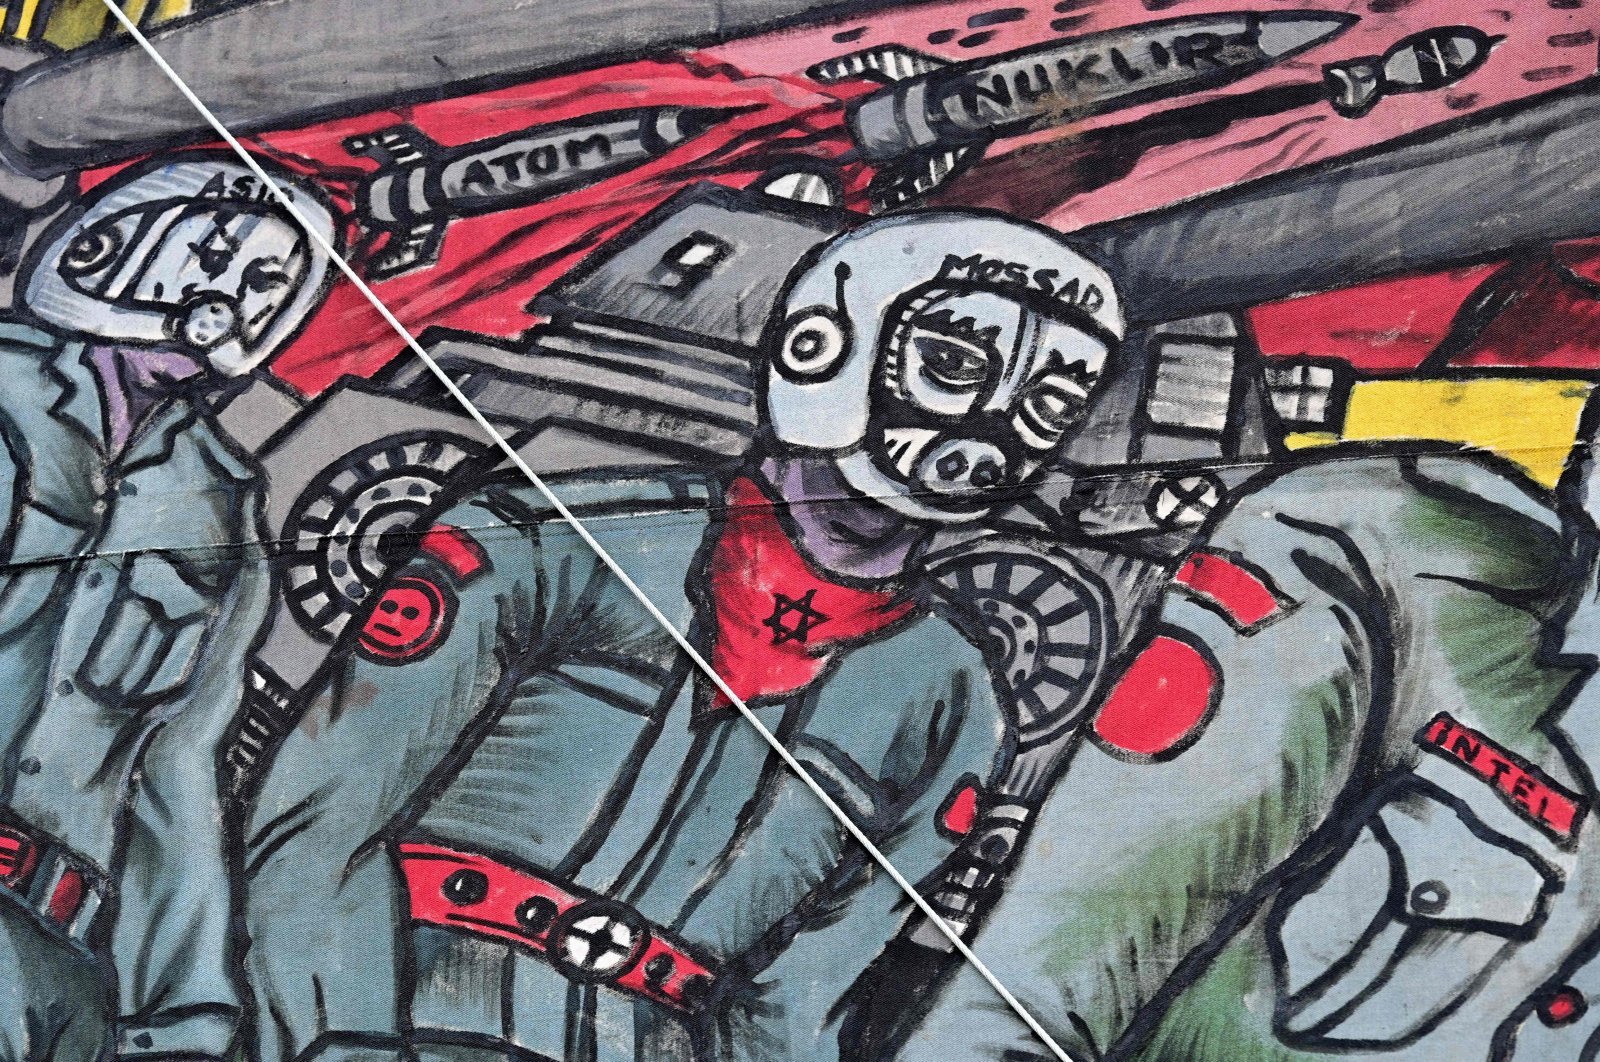 A detail of the controversial large-scale figurative representation &quot;People&#039;s Justice&quot; (2002) by Taring Padi, a collective of underground artists from Indonesia, depicting a soldier with a pig&#039;s face wearing a scarf with a Star of David and a helmet with the inscription &quot;Mossad&quot; is pictured during the documenta fifteen contemporary art exhibition in Kassel, Germany, June 20, 2022. (AFP)